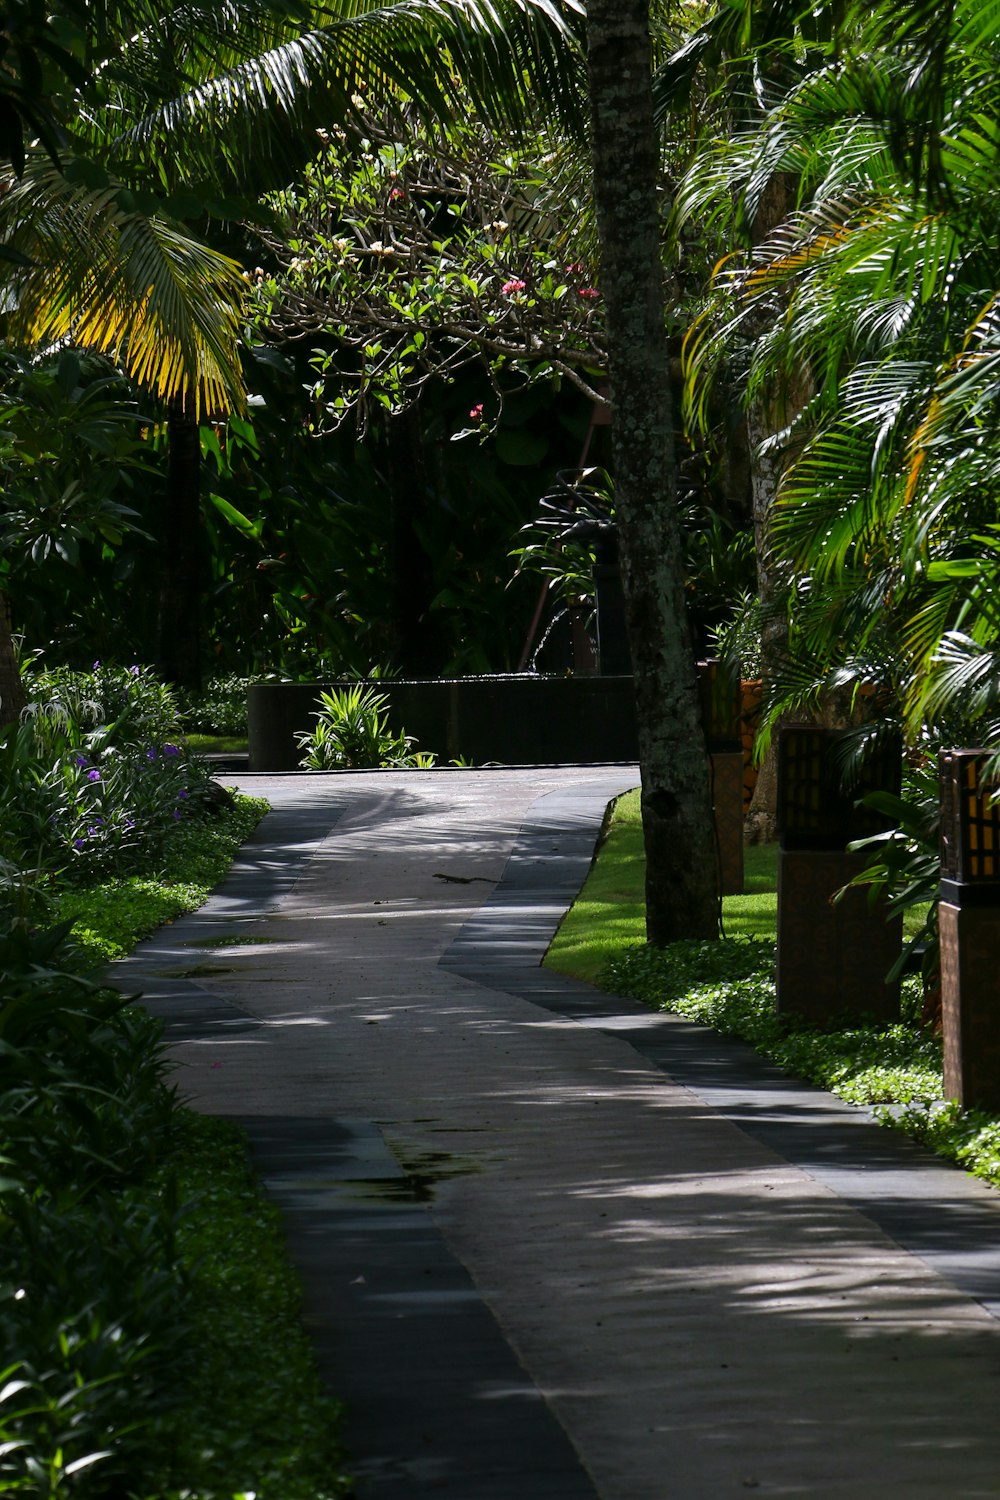 a paved road surrounded by lush green trees